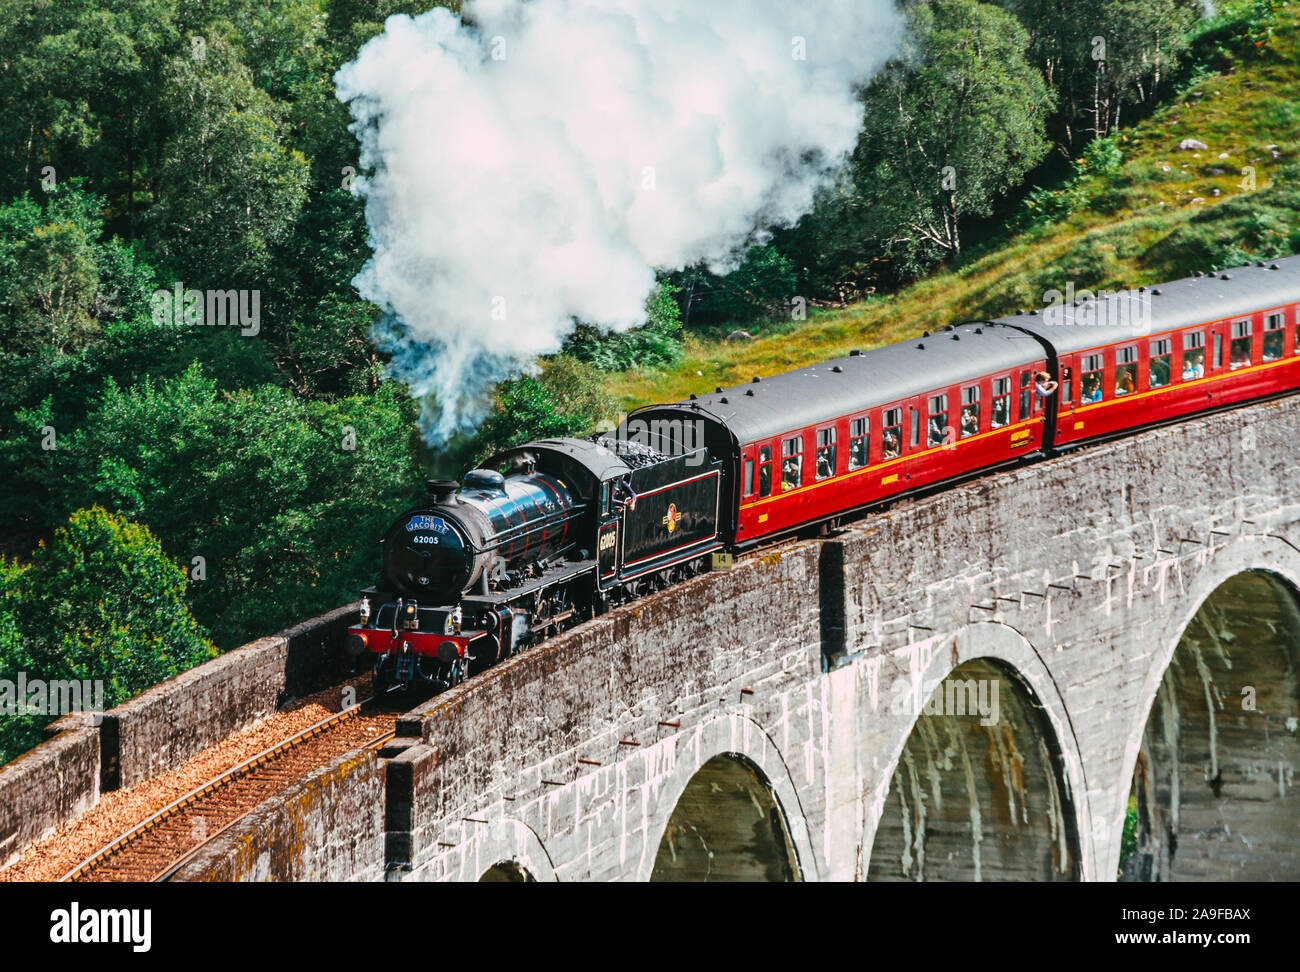 The Jacobite Steam Train, also known as the Hogwarts train as it was used in the Harry Potter movie franchise, traveling along the Glenfinnan Viaduct Stock Photo